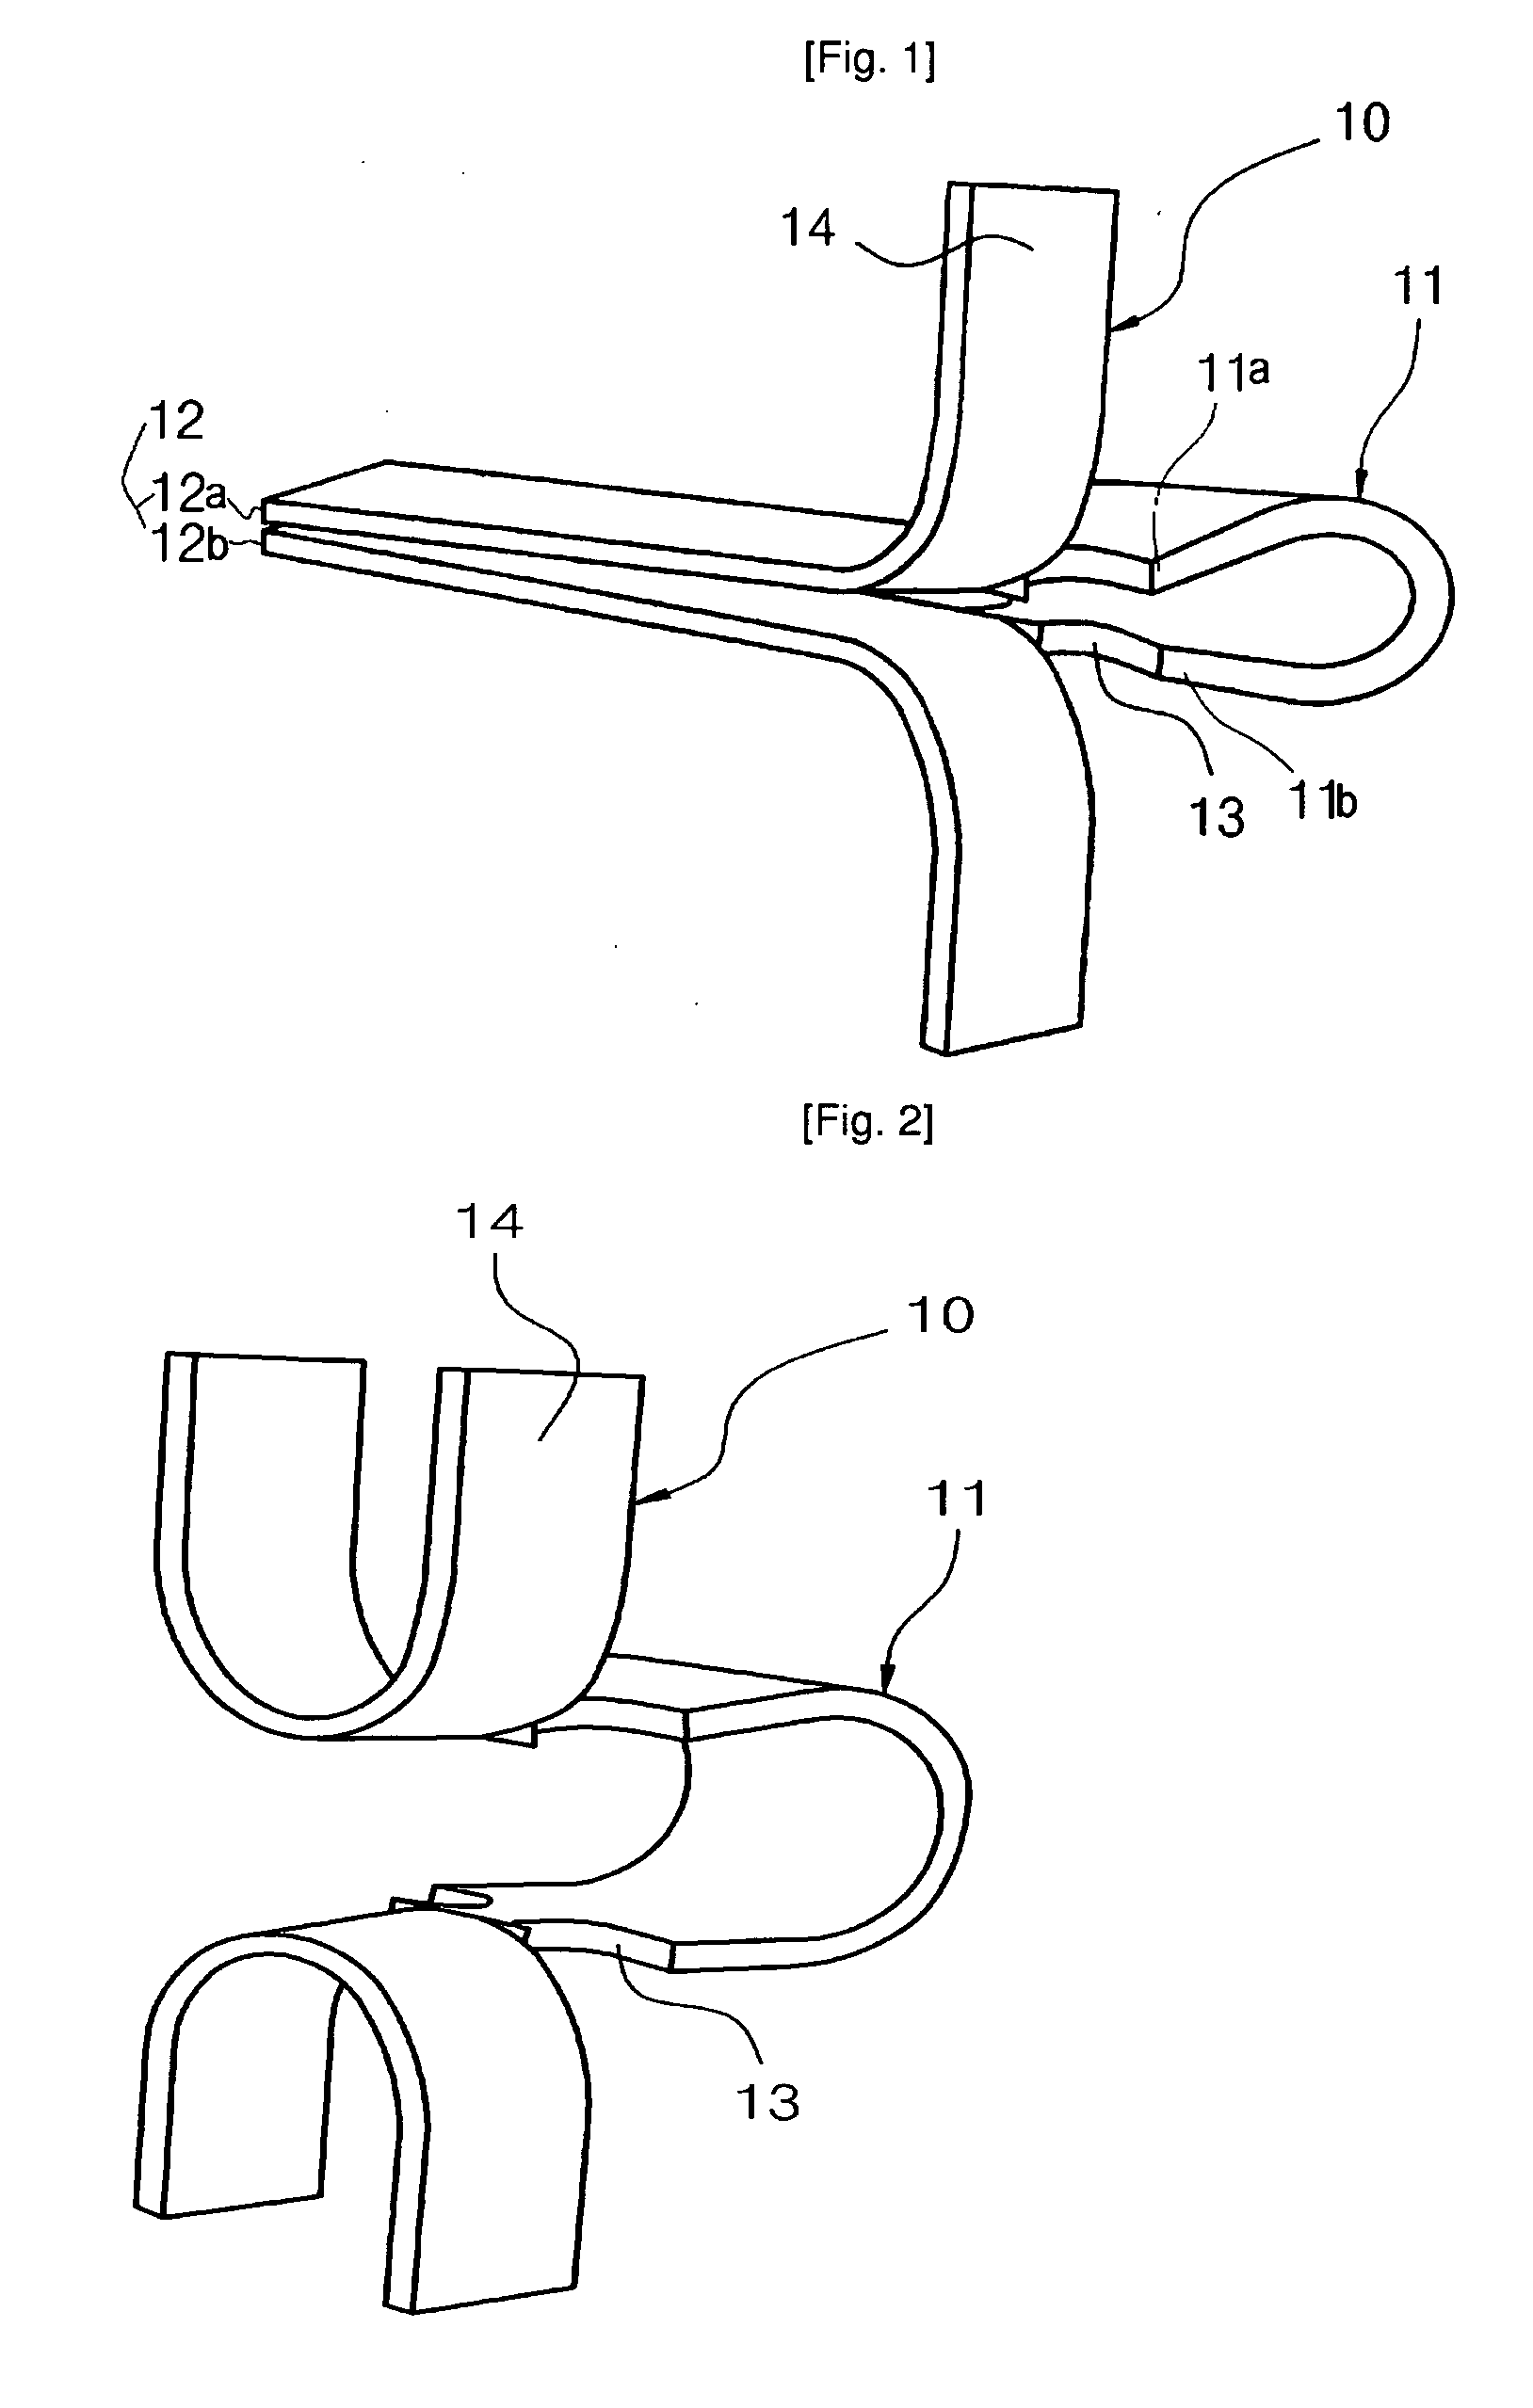 Spacer for use in a surgical operation for spinous process of spine